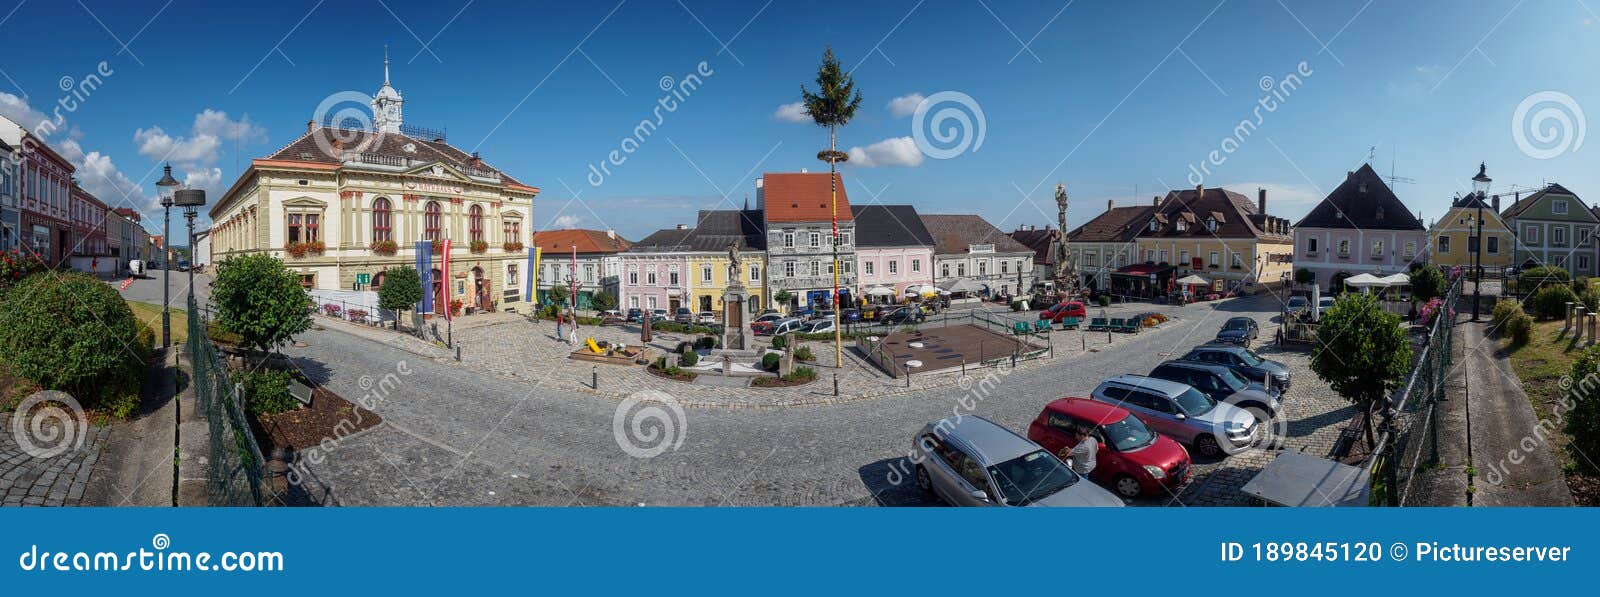 WEITRA/LOWER AUSTRIA - August 2019: Panoramic view of the center of the historic town Weitra in the Waldviertel region in Lower Austria